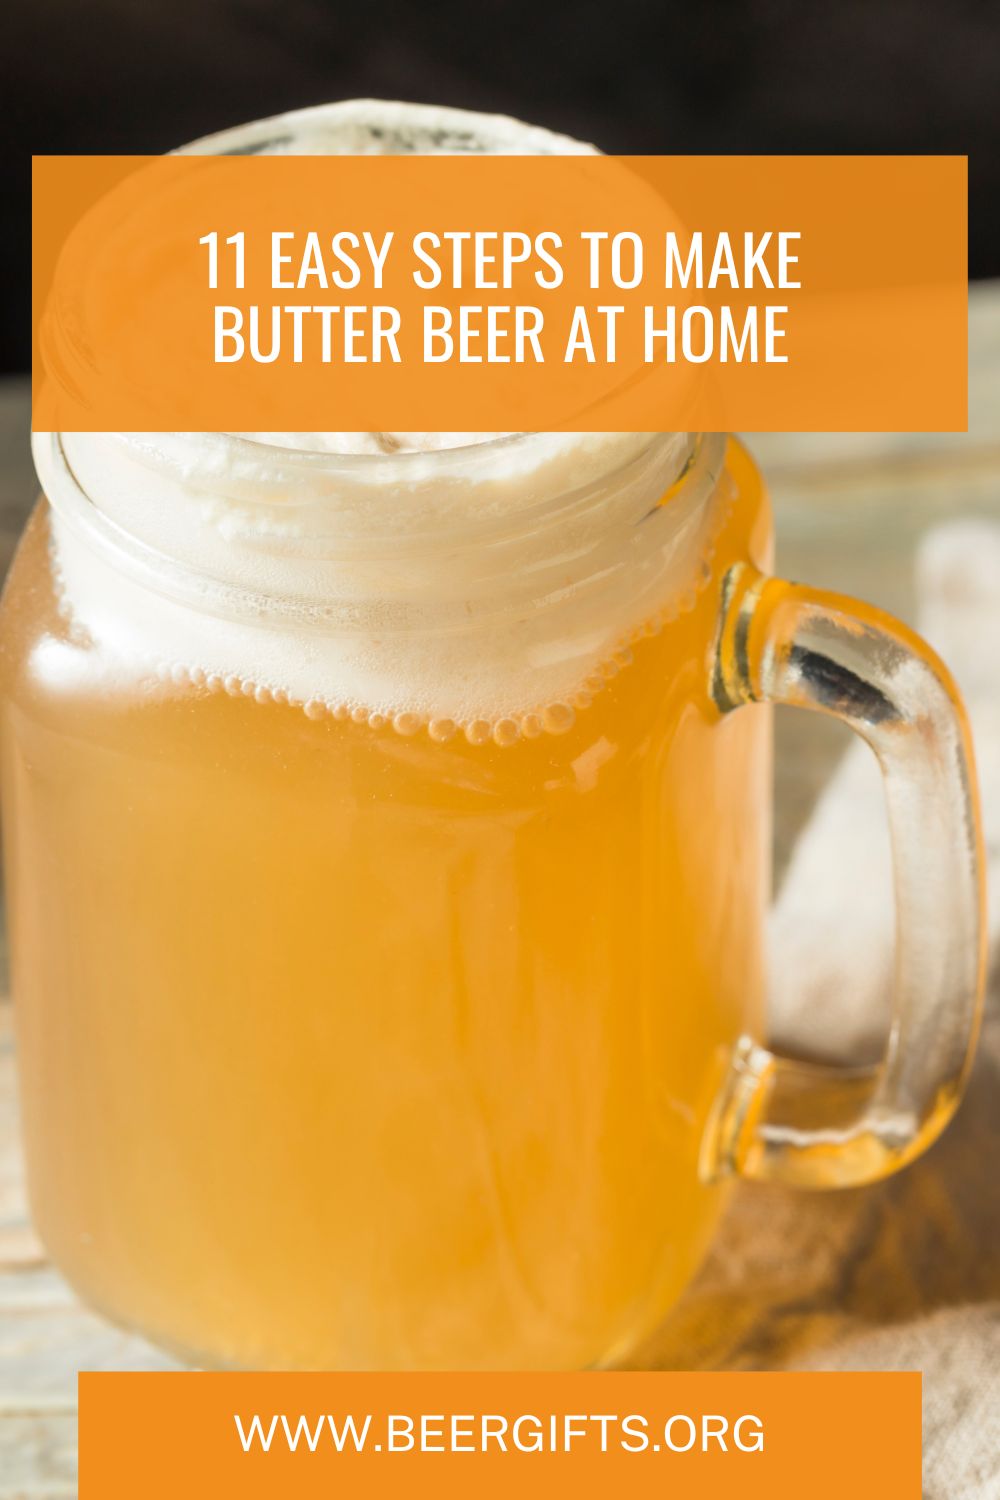 11 Easy Steps To Make Butter Beer At Home2